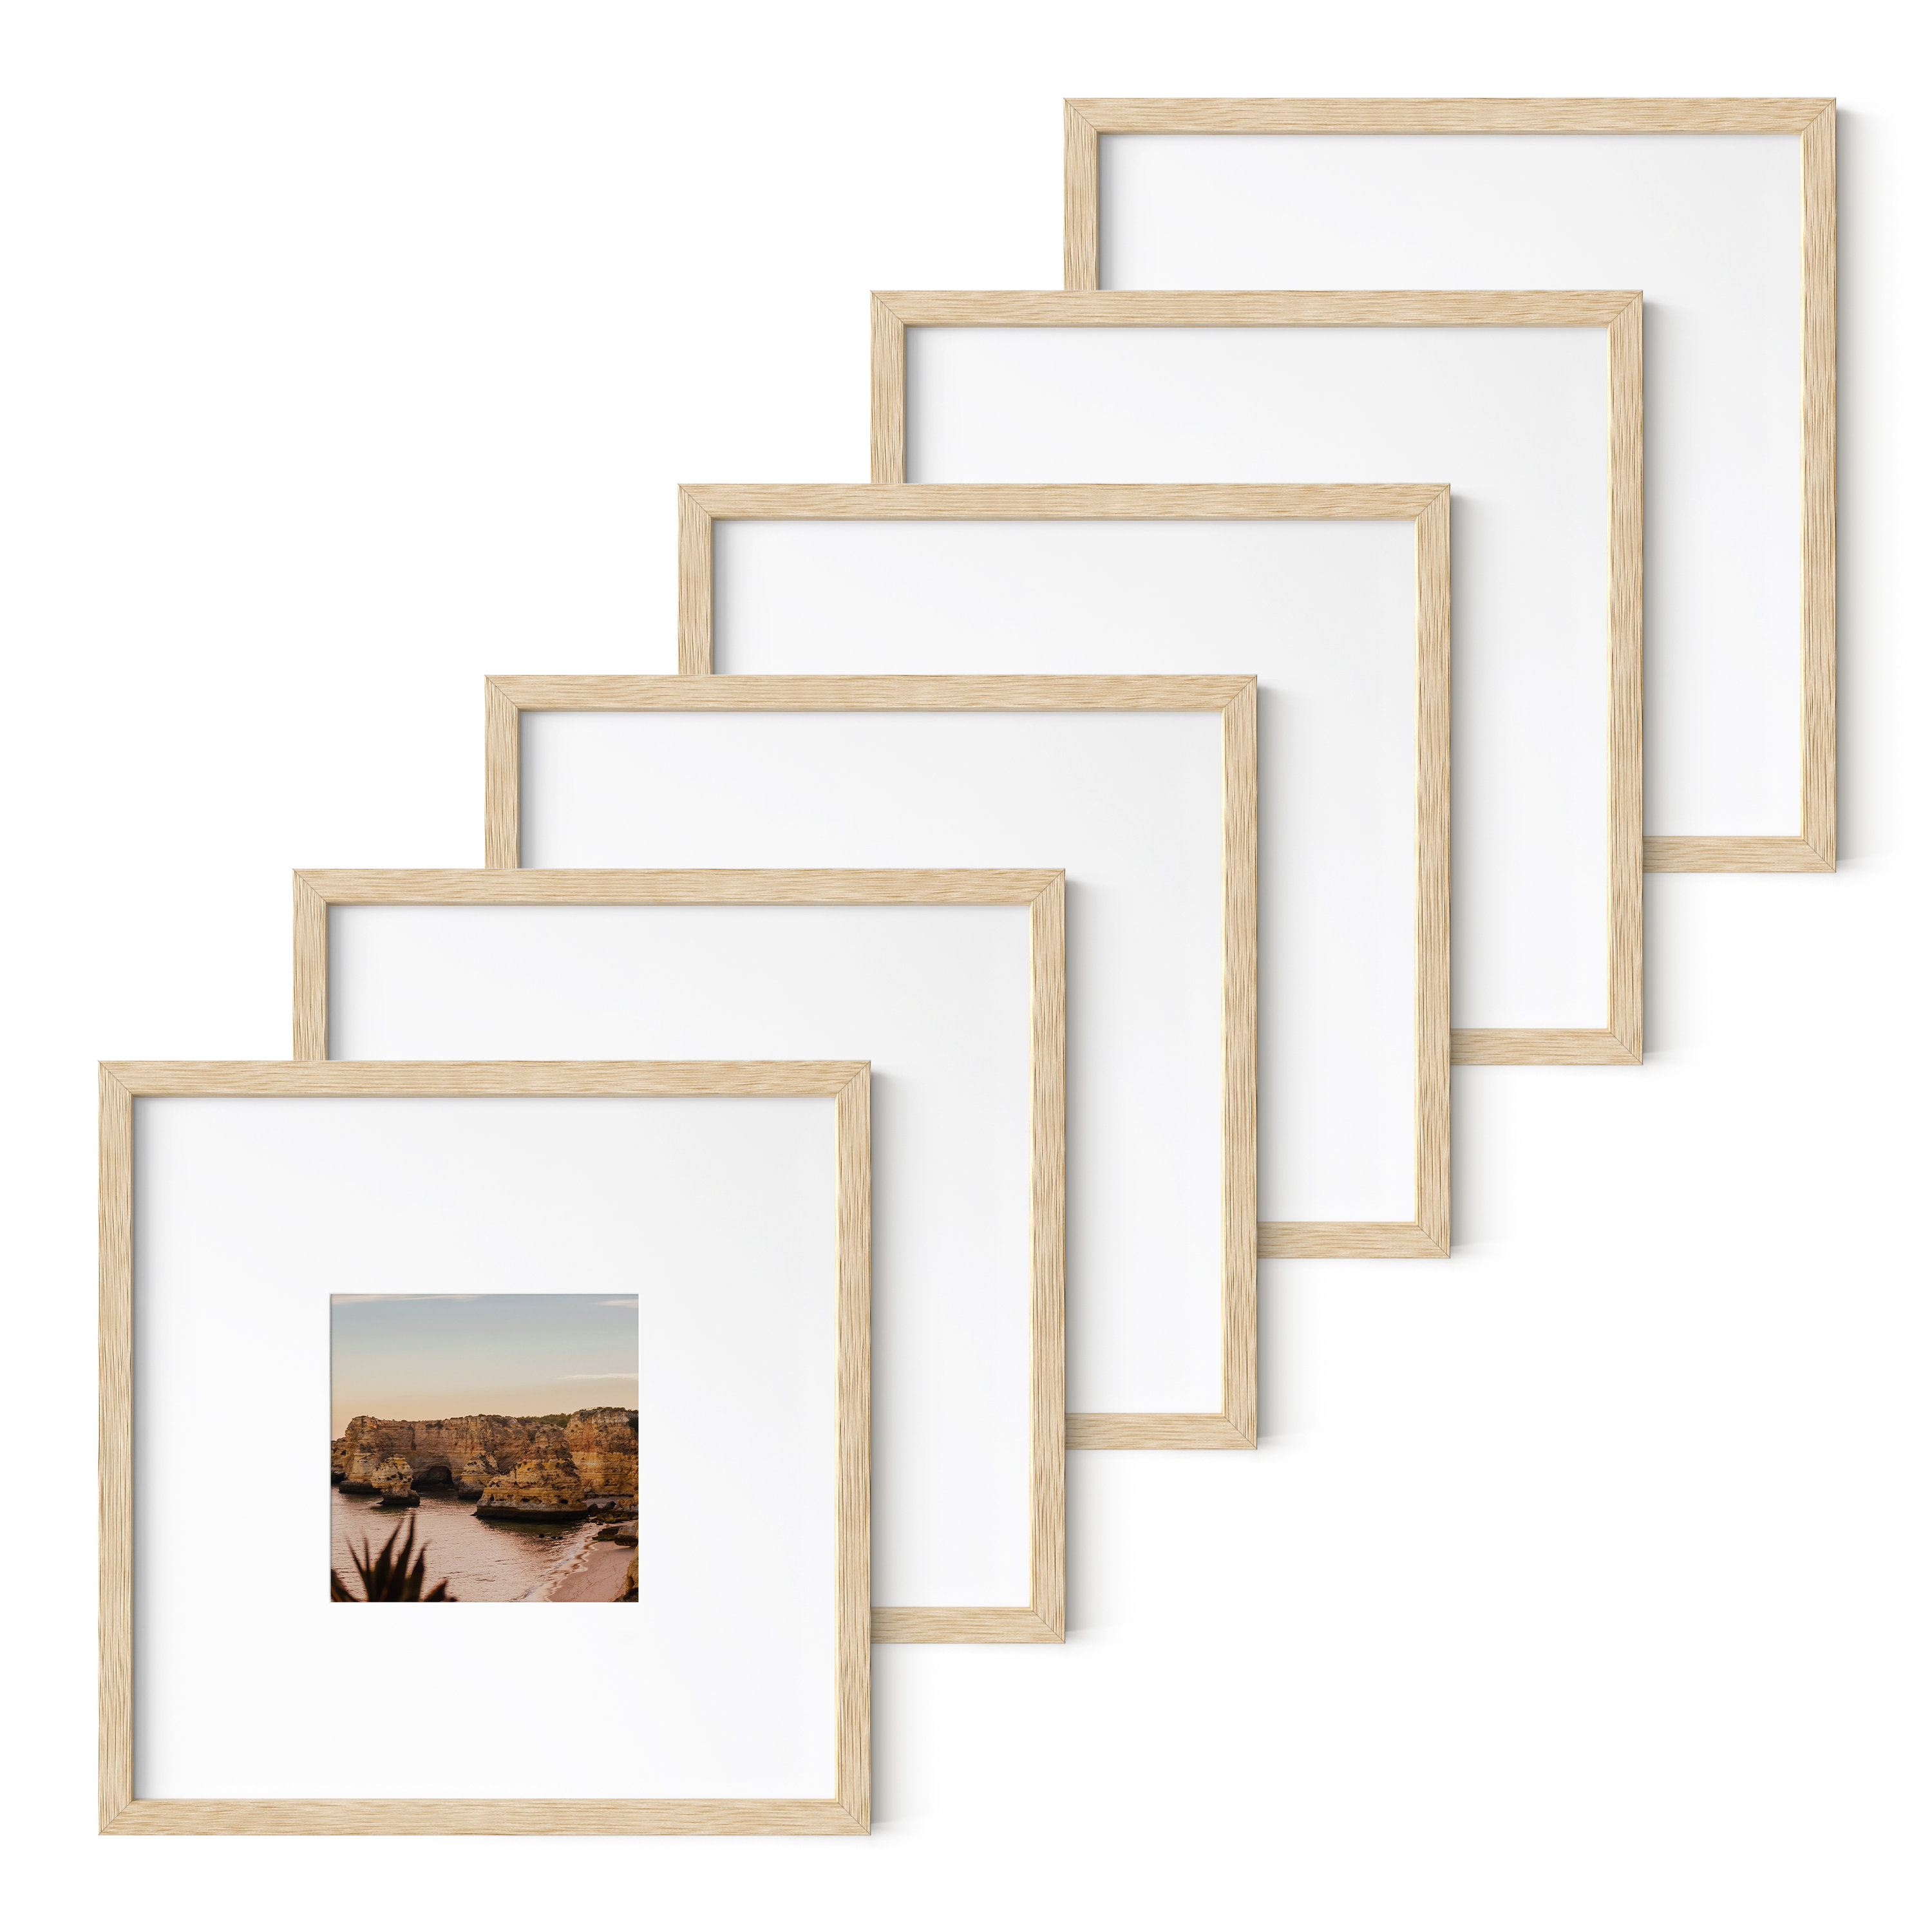 MCS 16x20 Solid Wood Art Frame Matted For 11x14 In Black 